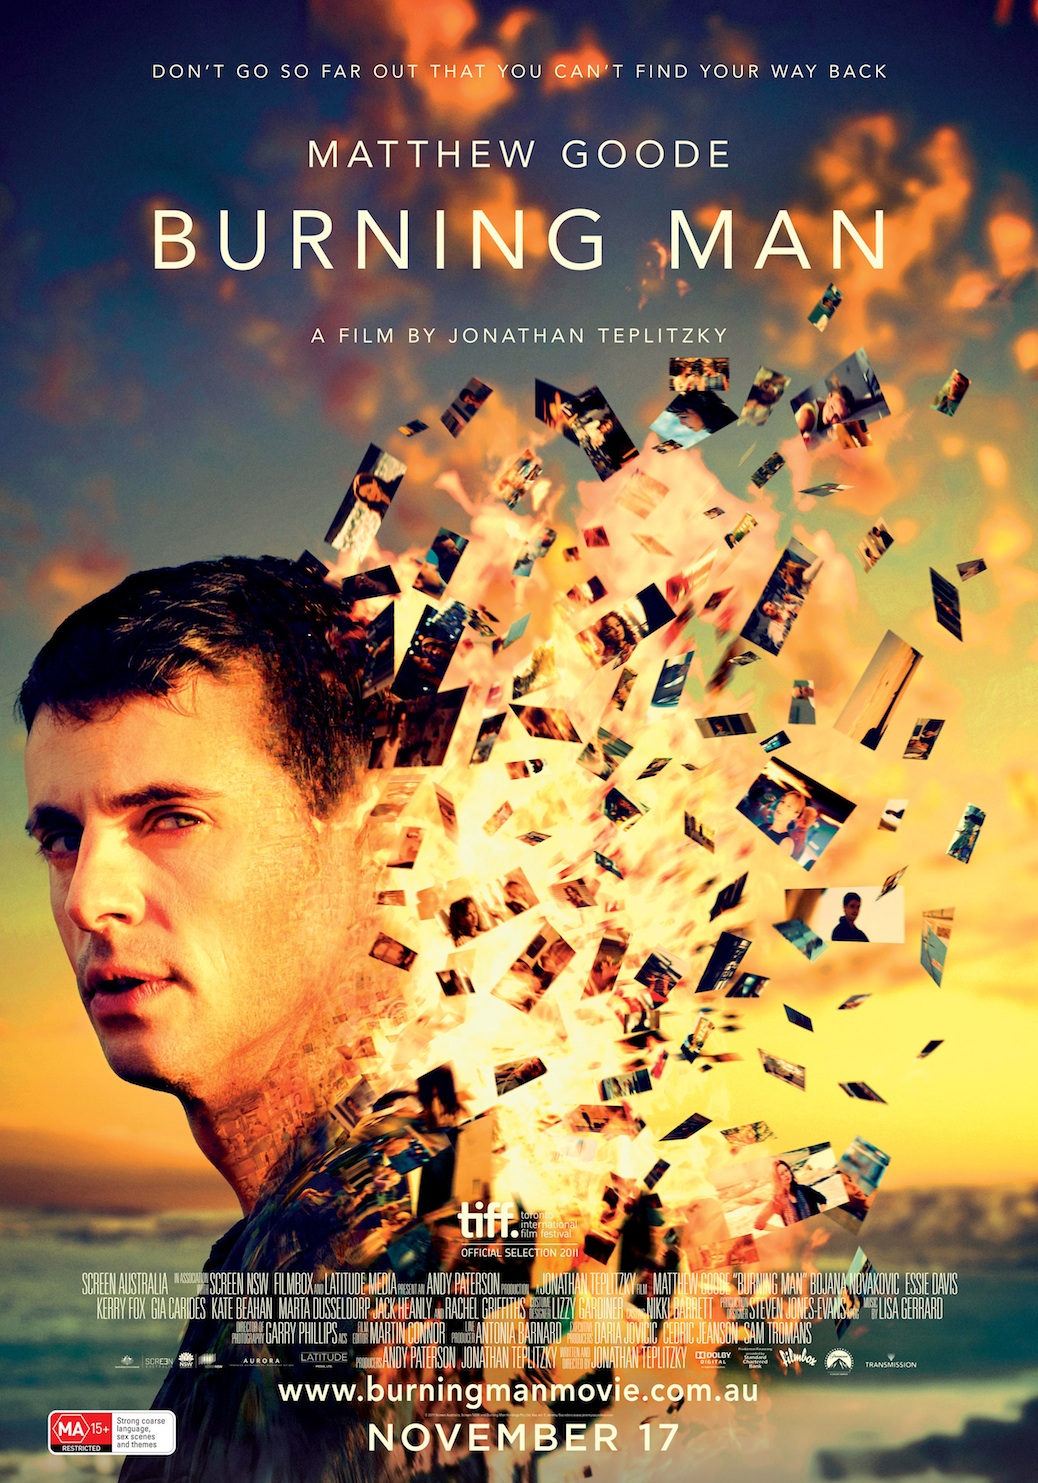 http://www.thereelbits.com/wp-content/uploads/2011/09/burning-man-poster002.jpg